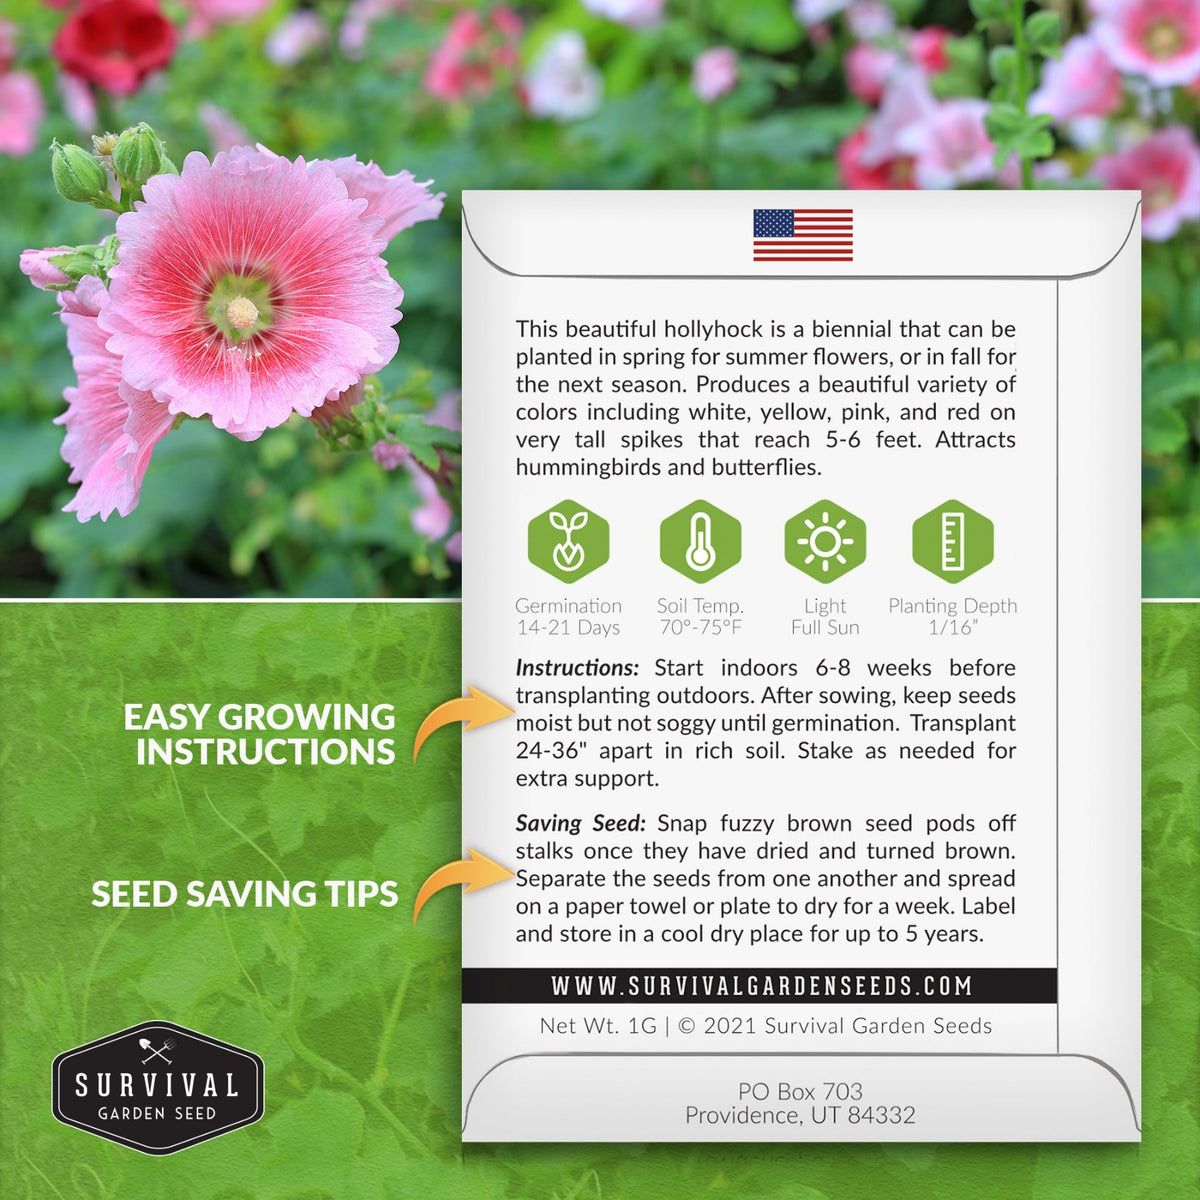 Single Mixed Hollyhock seed planting instructions